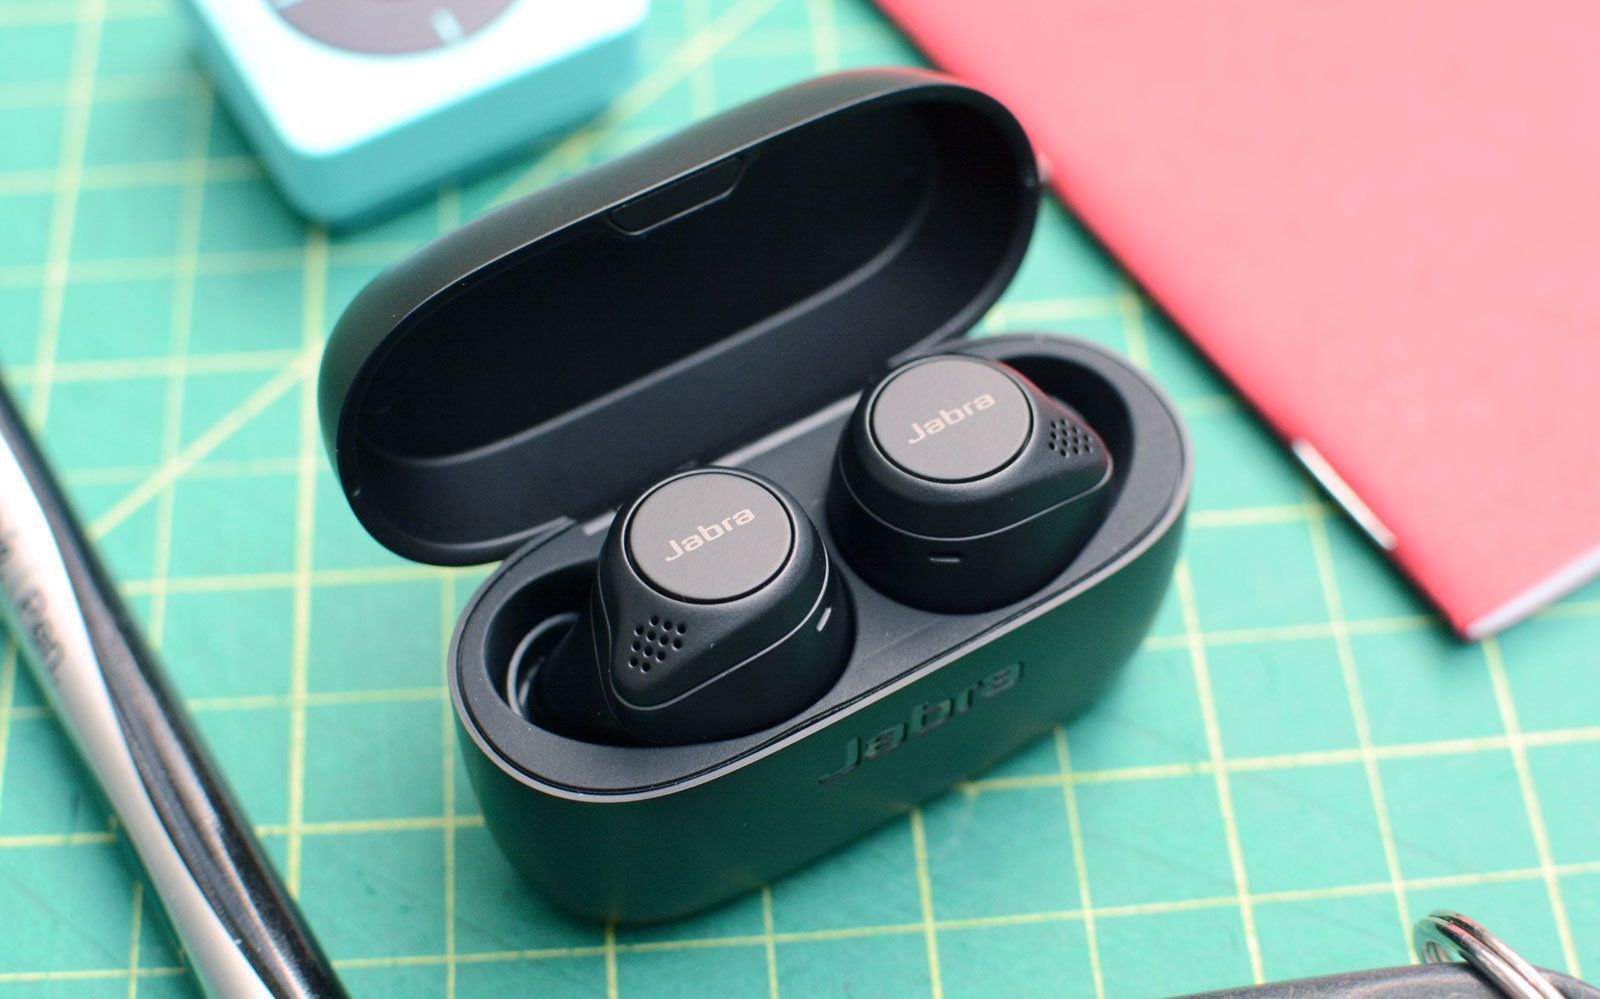 Jabra's Elite 75t earbuds are down to $80 today only